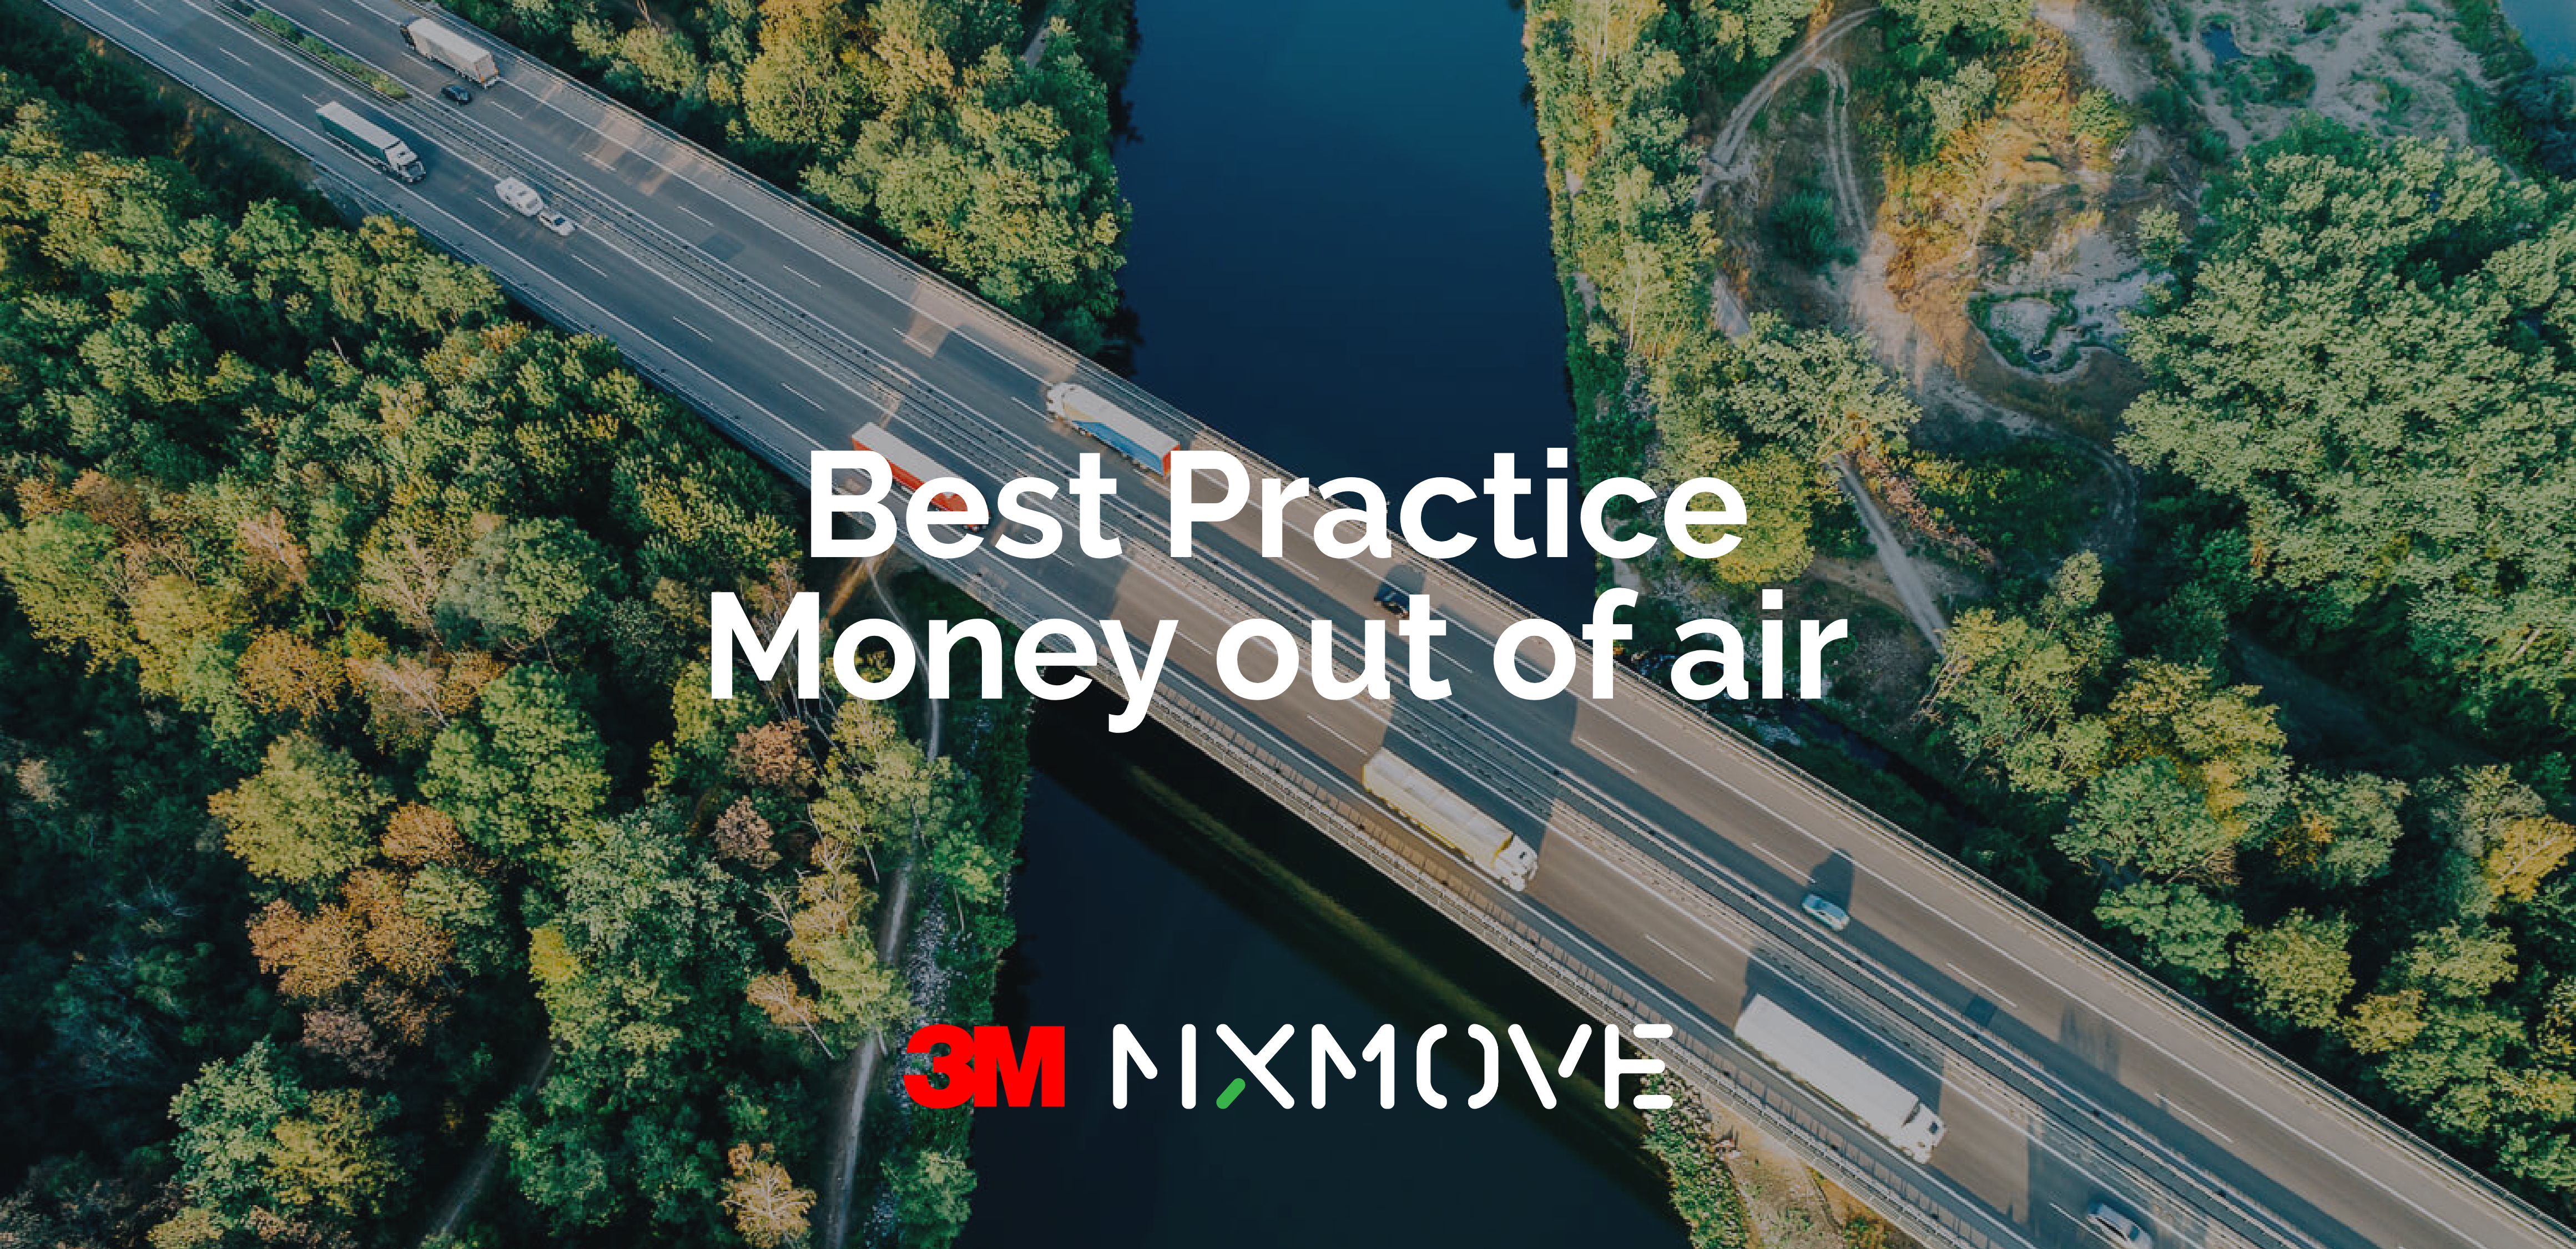 Best Practice Money out of air, Mixmove